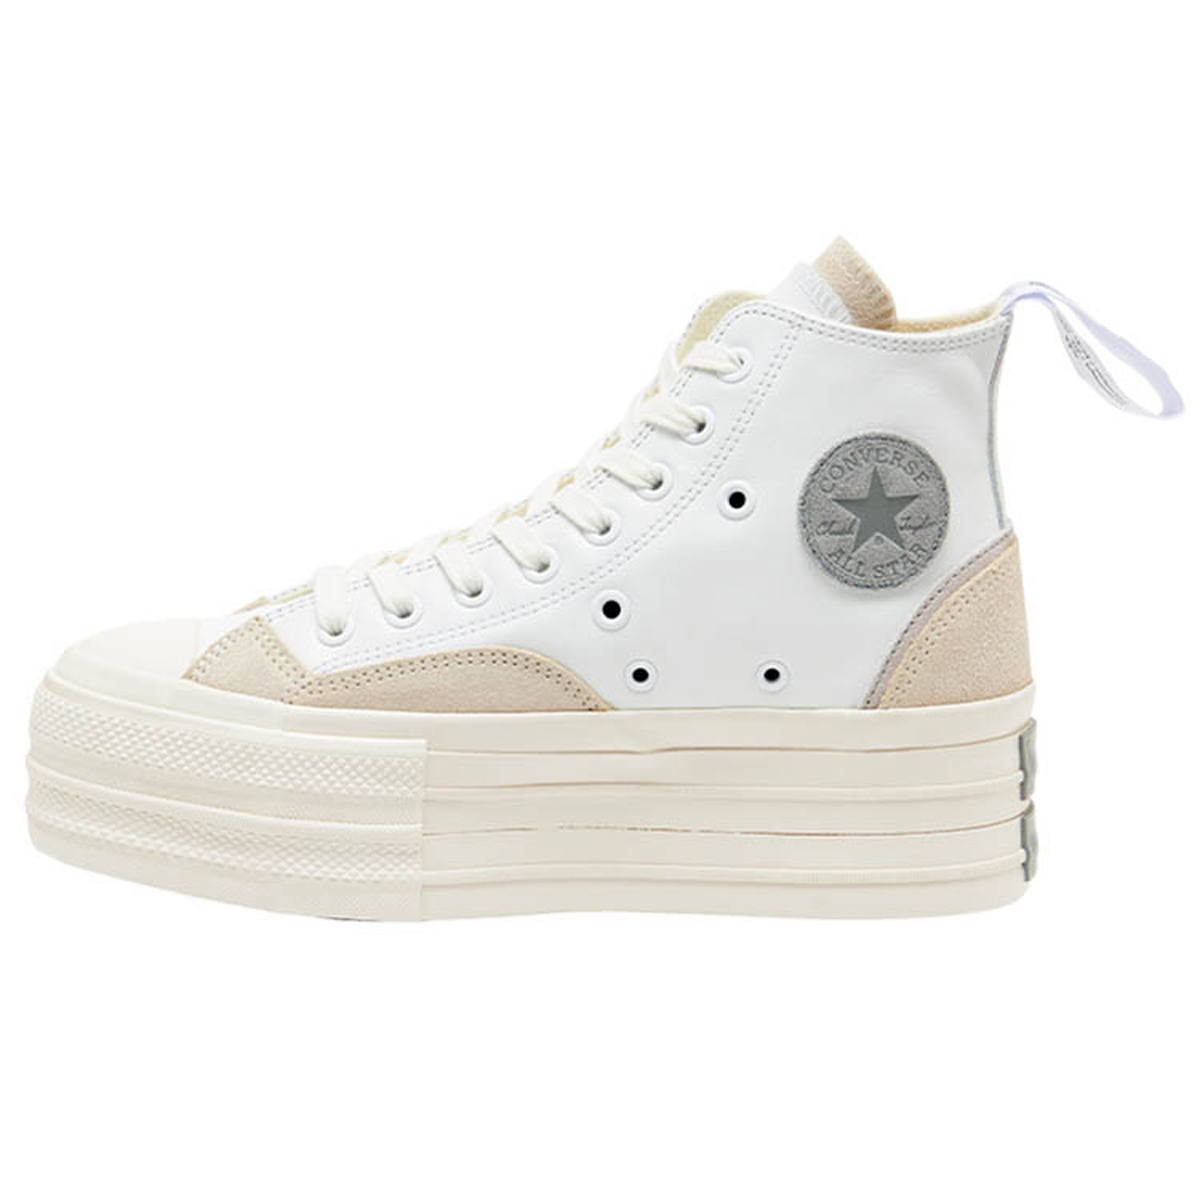 ROKH Doubles up on the Converse Chuck Taylors' Sole